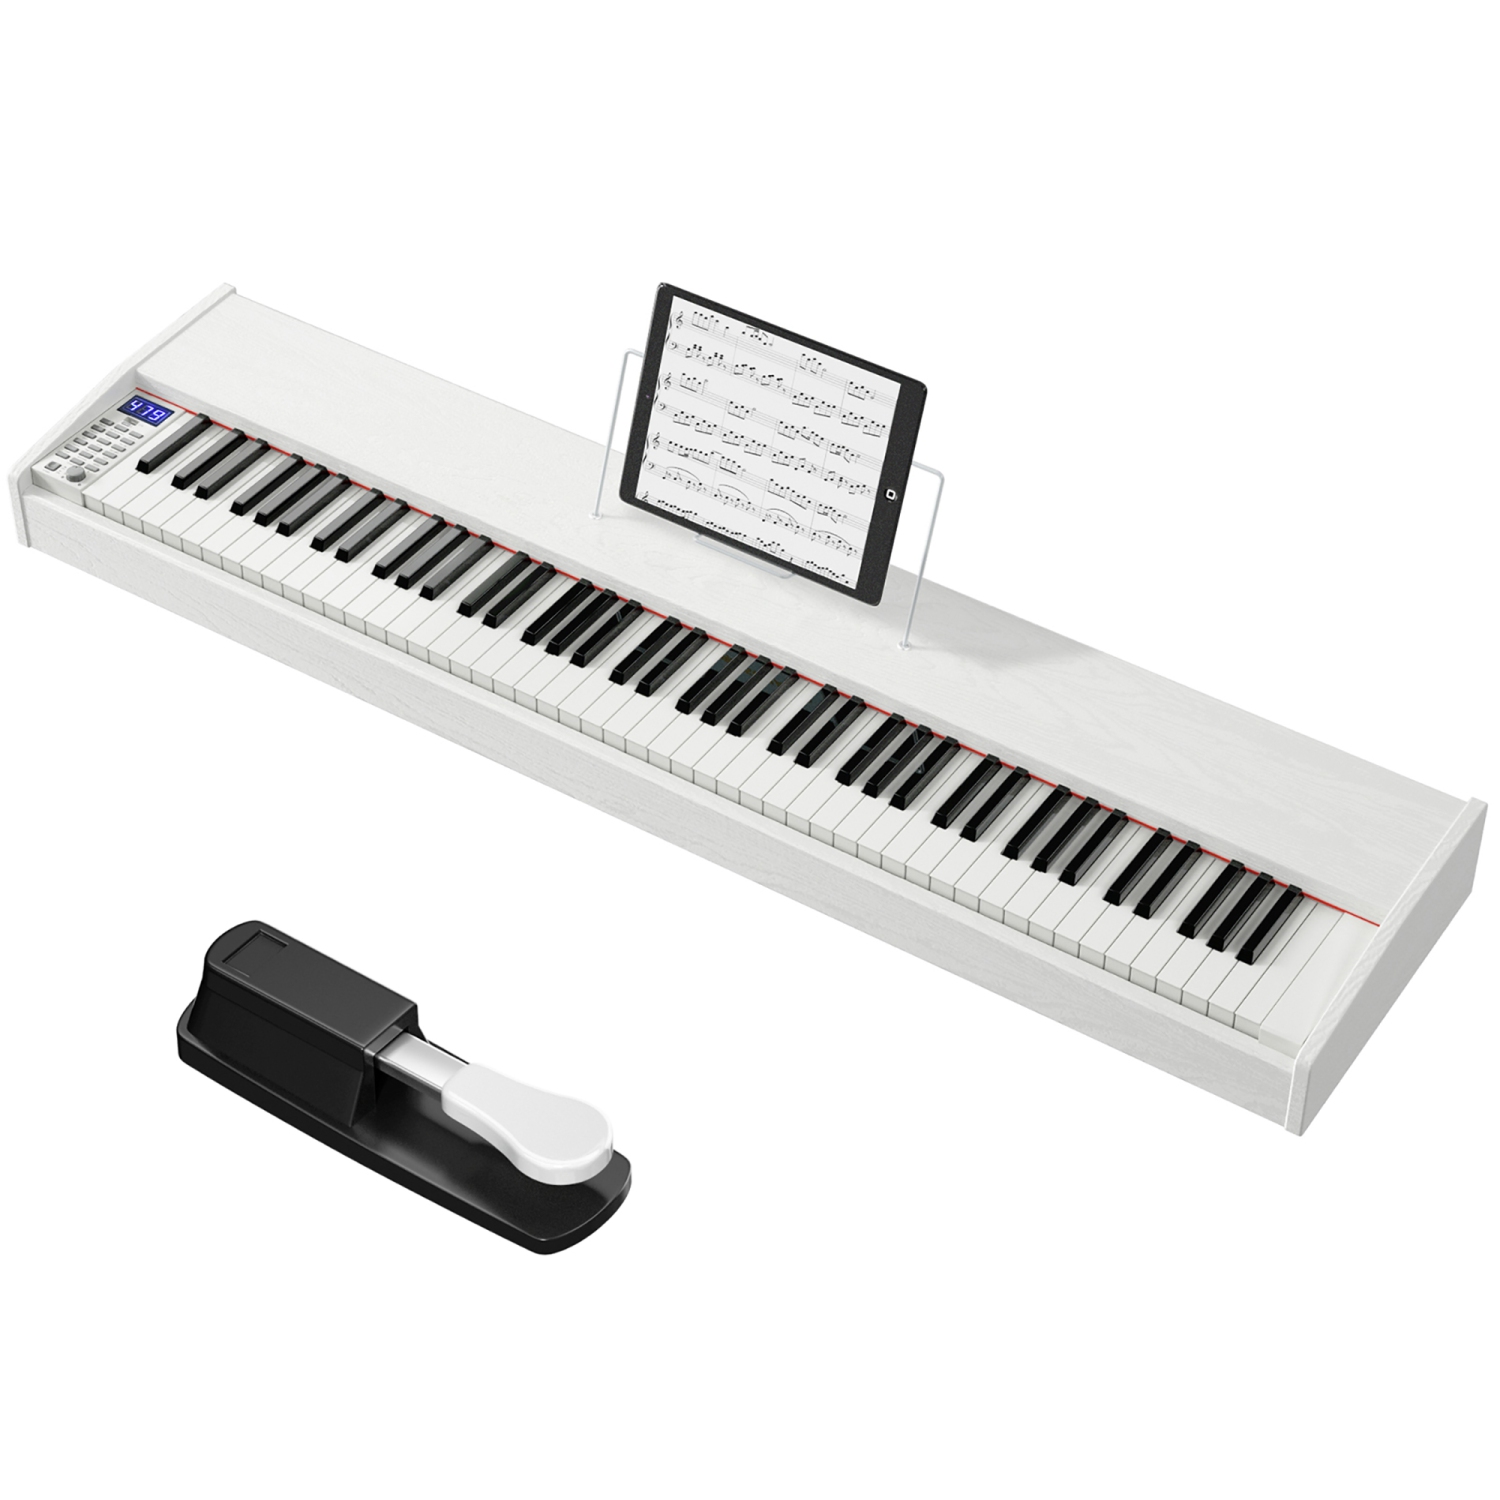 Costway 88-Key Full Size Digital Piano Weighted Keyboard w/ Sustain Pedal